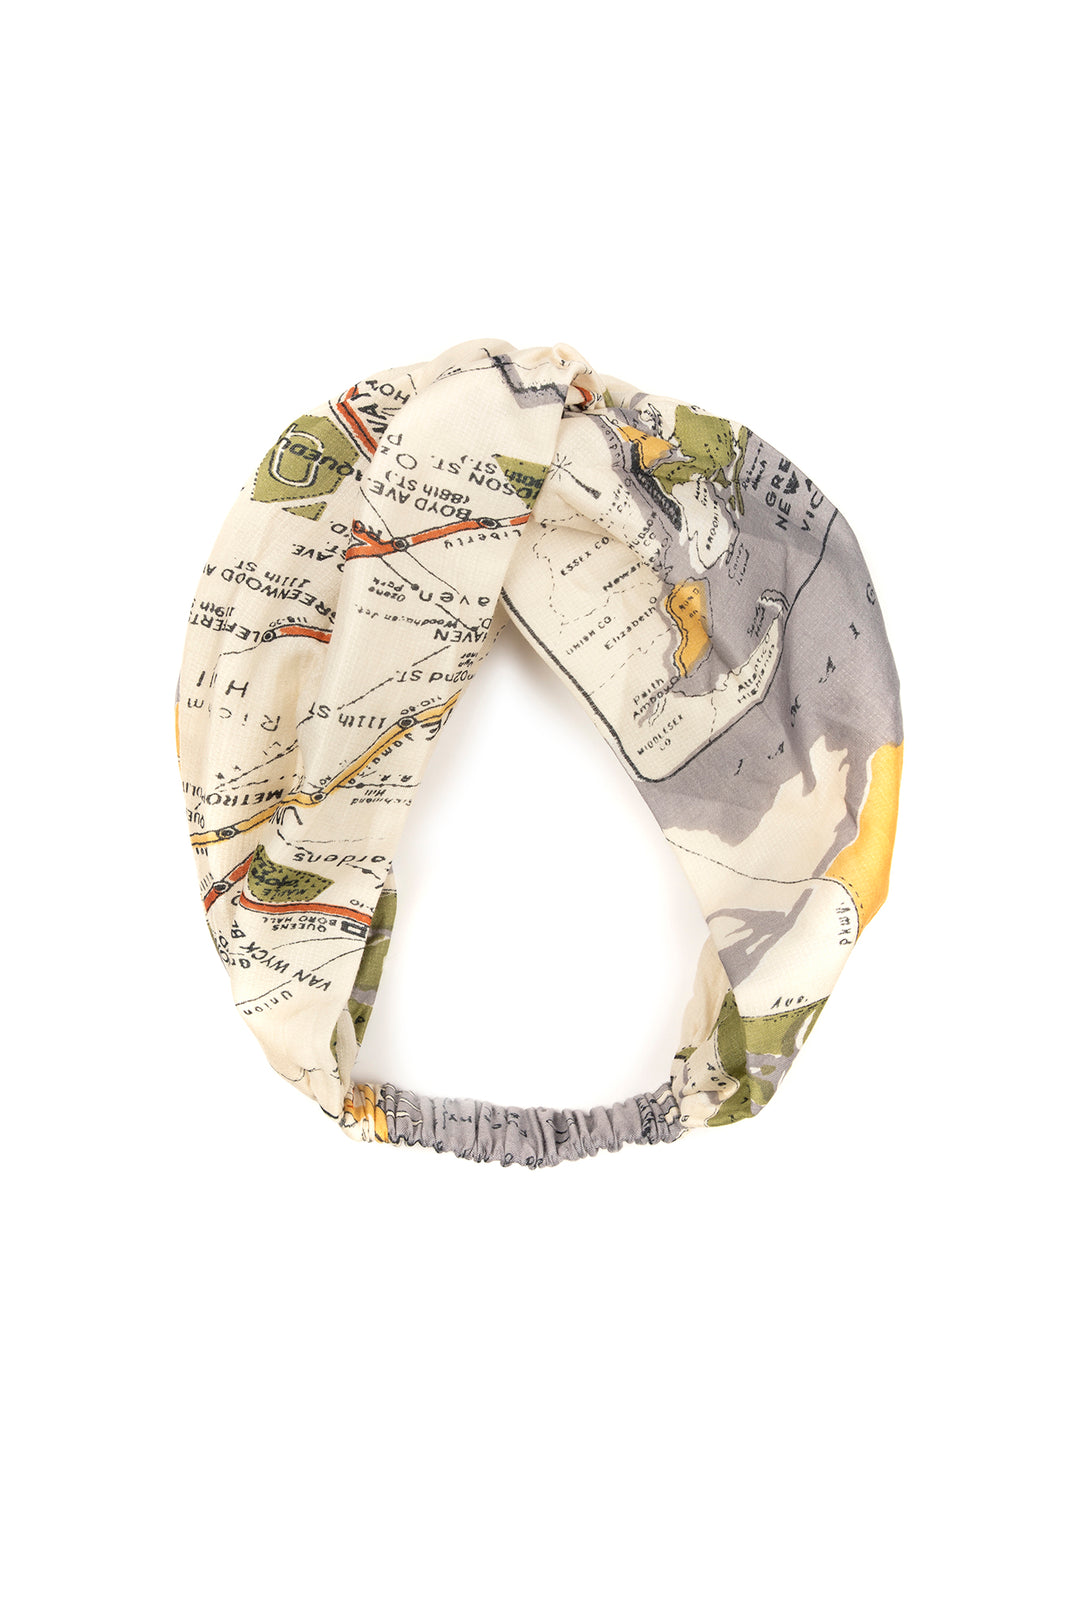 One Hundred Stars New York City Map Headband- Our headbands are made from 100% recycled material using offcuts from our clothing production.